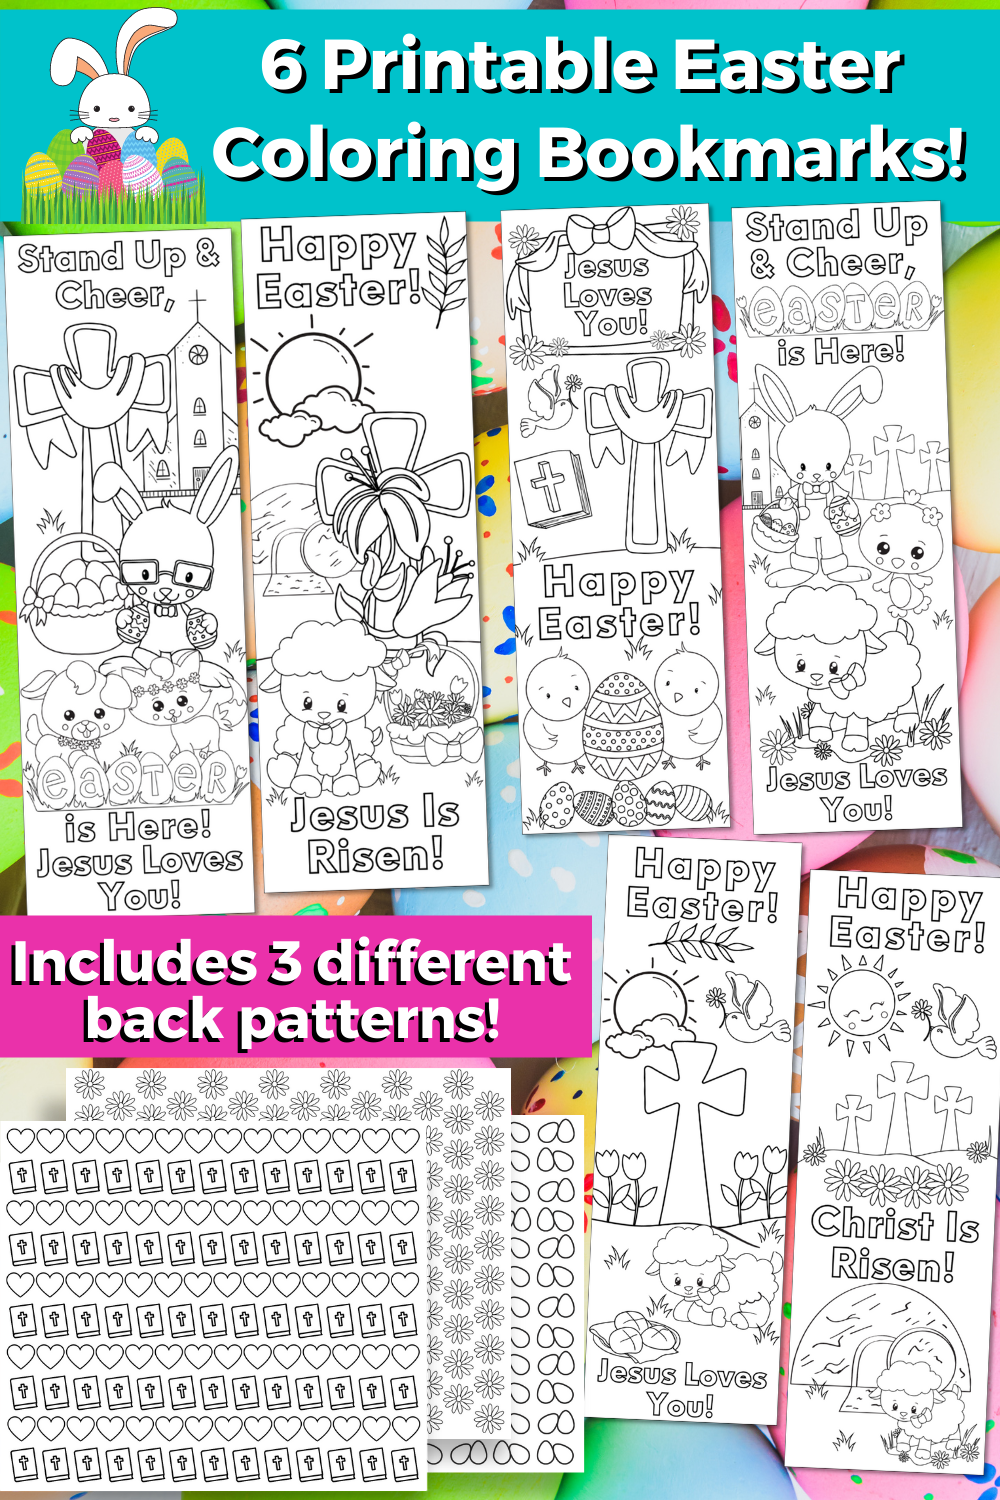 Shows a picture of the 6 printable Easter coloring bookmarks and the 3 different back patterns.